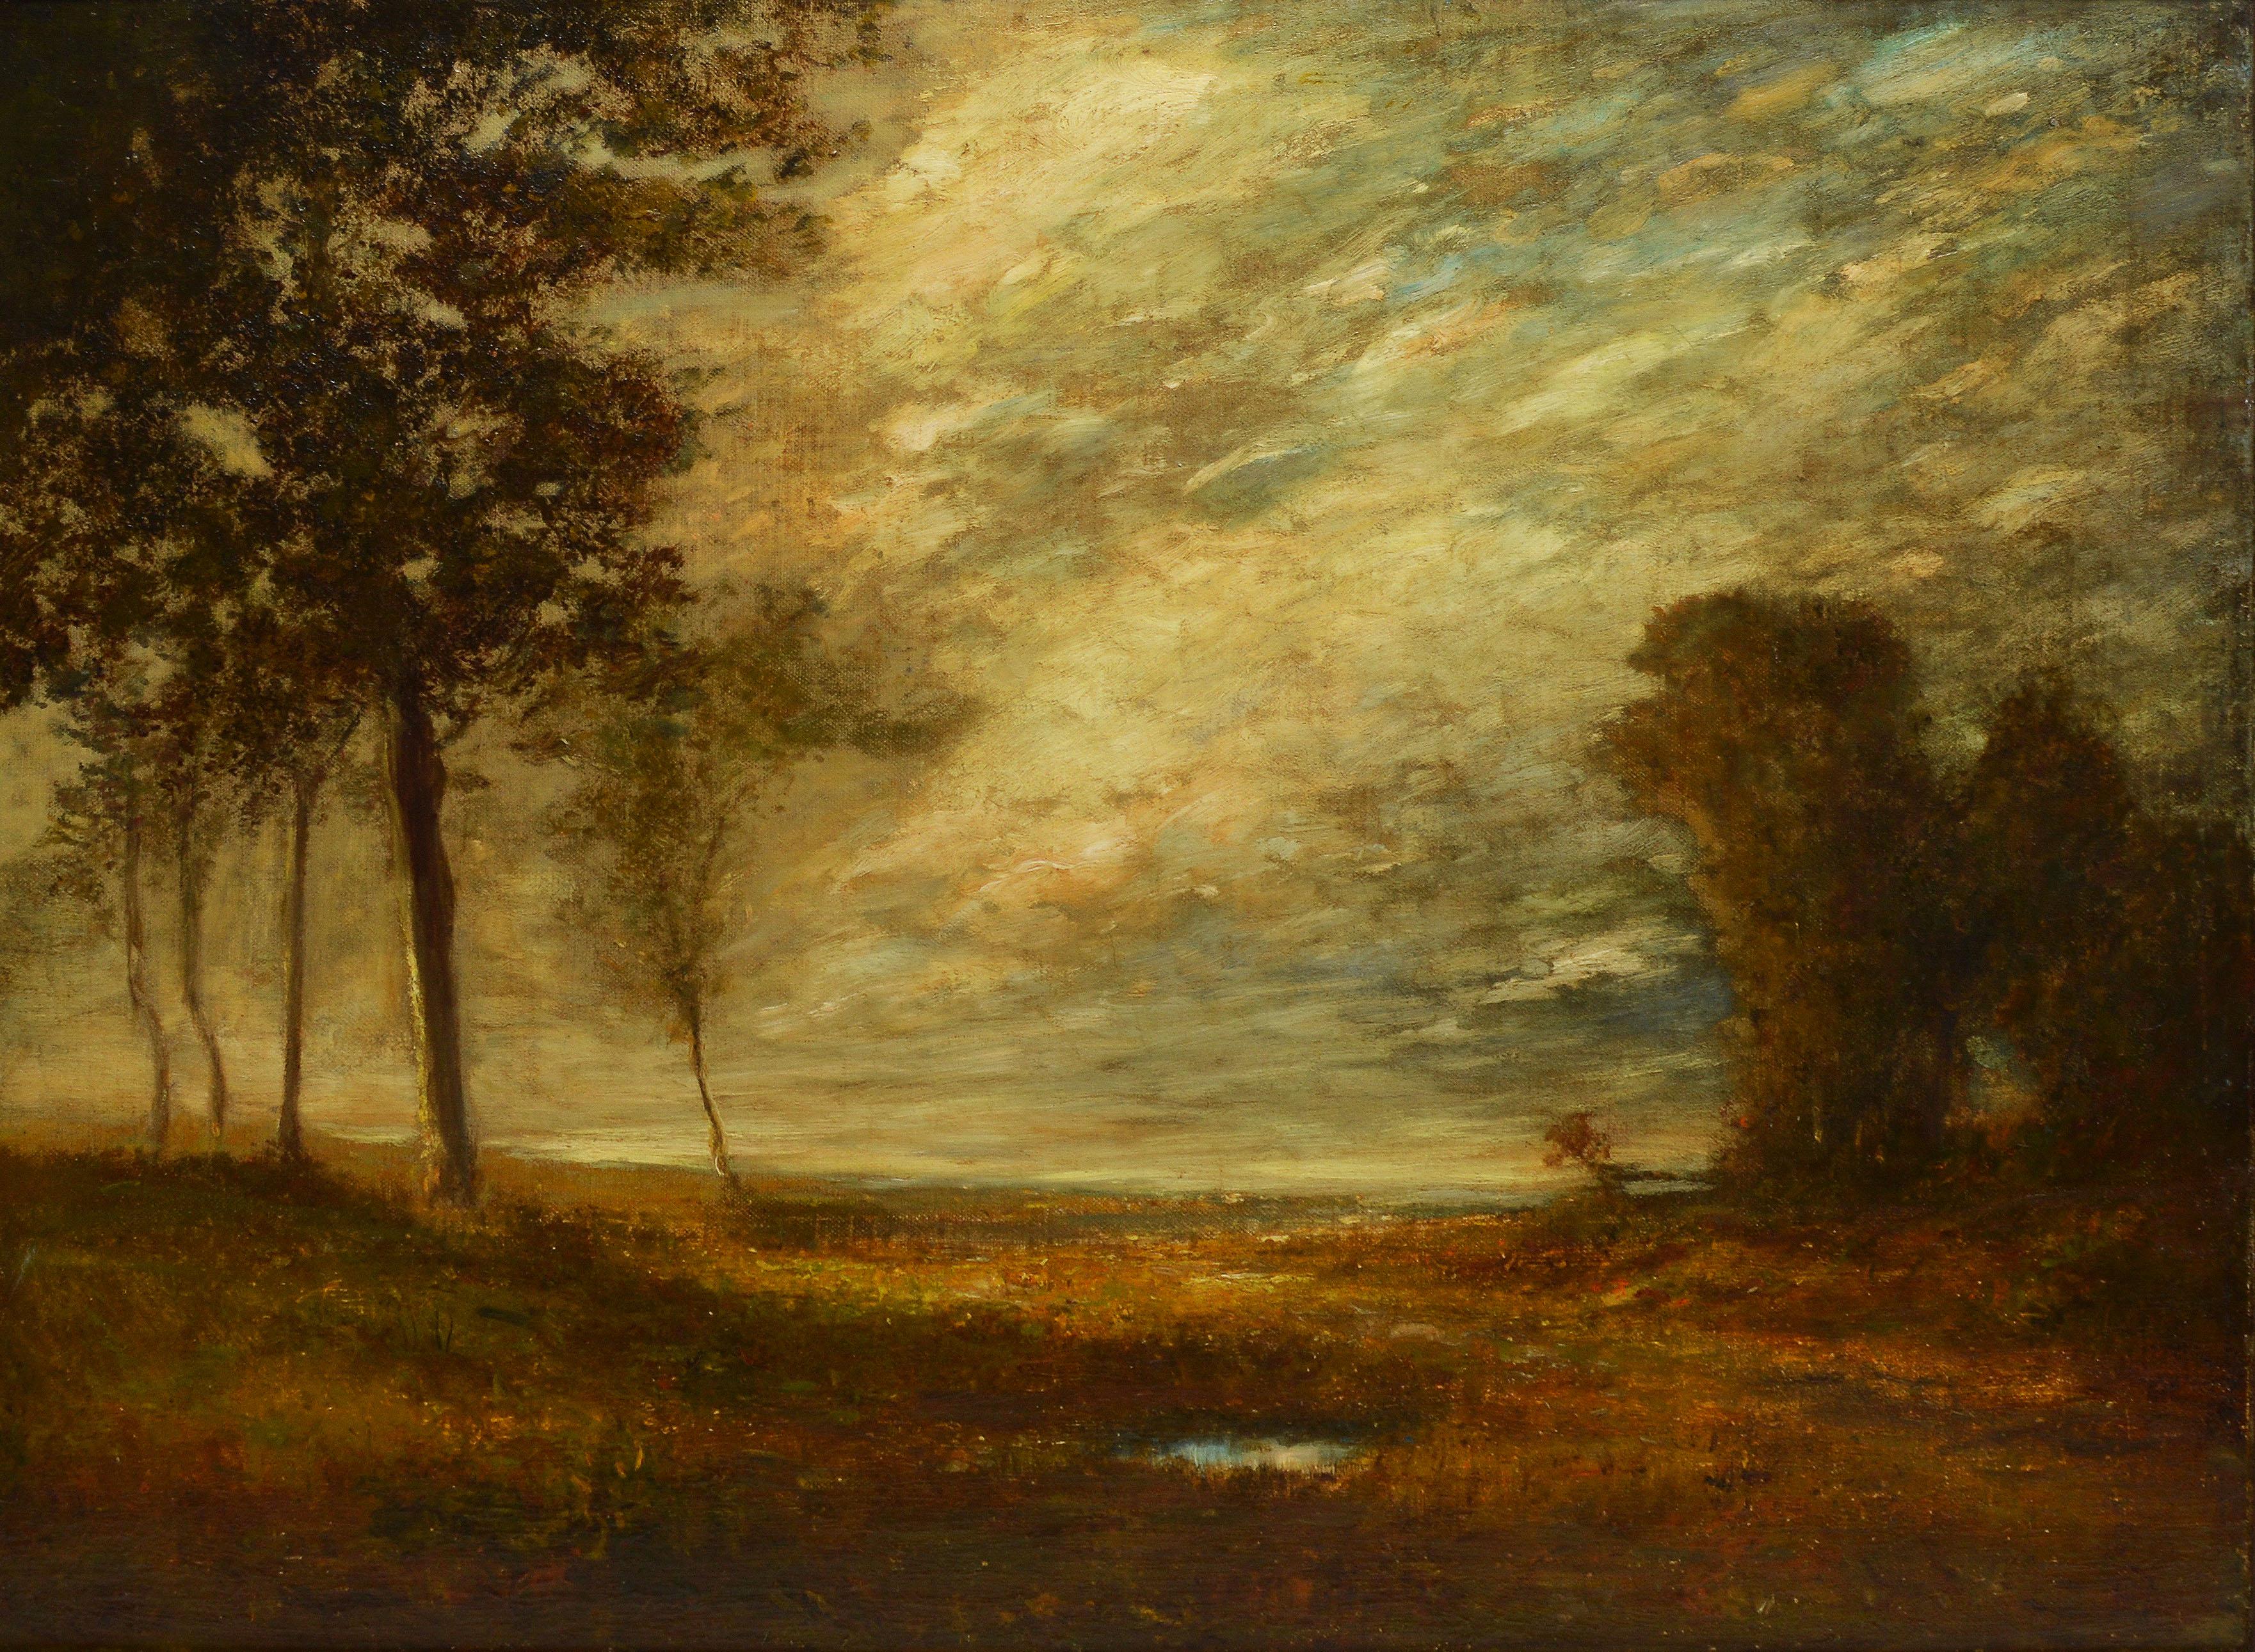 Antique American school tonalist landscape painting.  Oil on canvas, circa 1880.  Unsigned.
 Displayed in a period impressionist frame.  Image size, 30